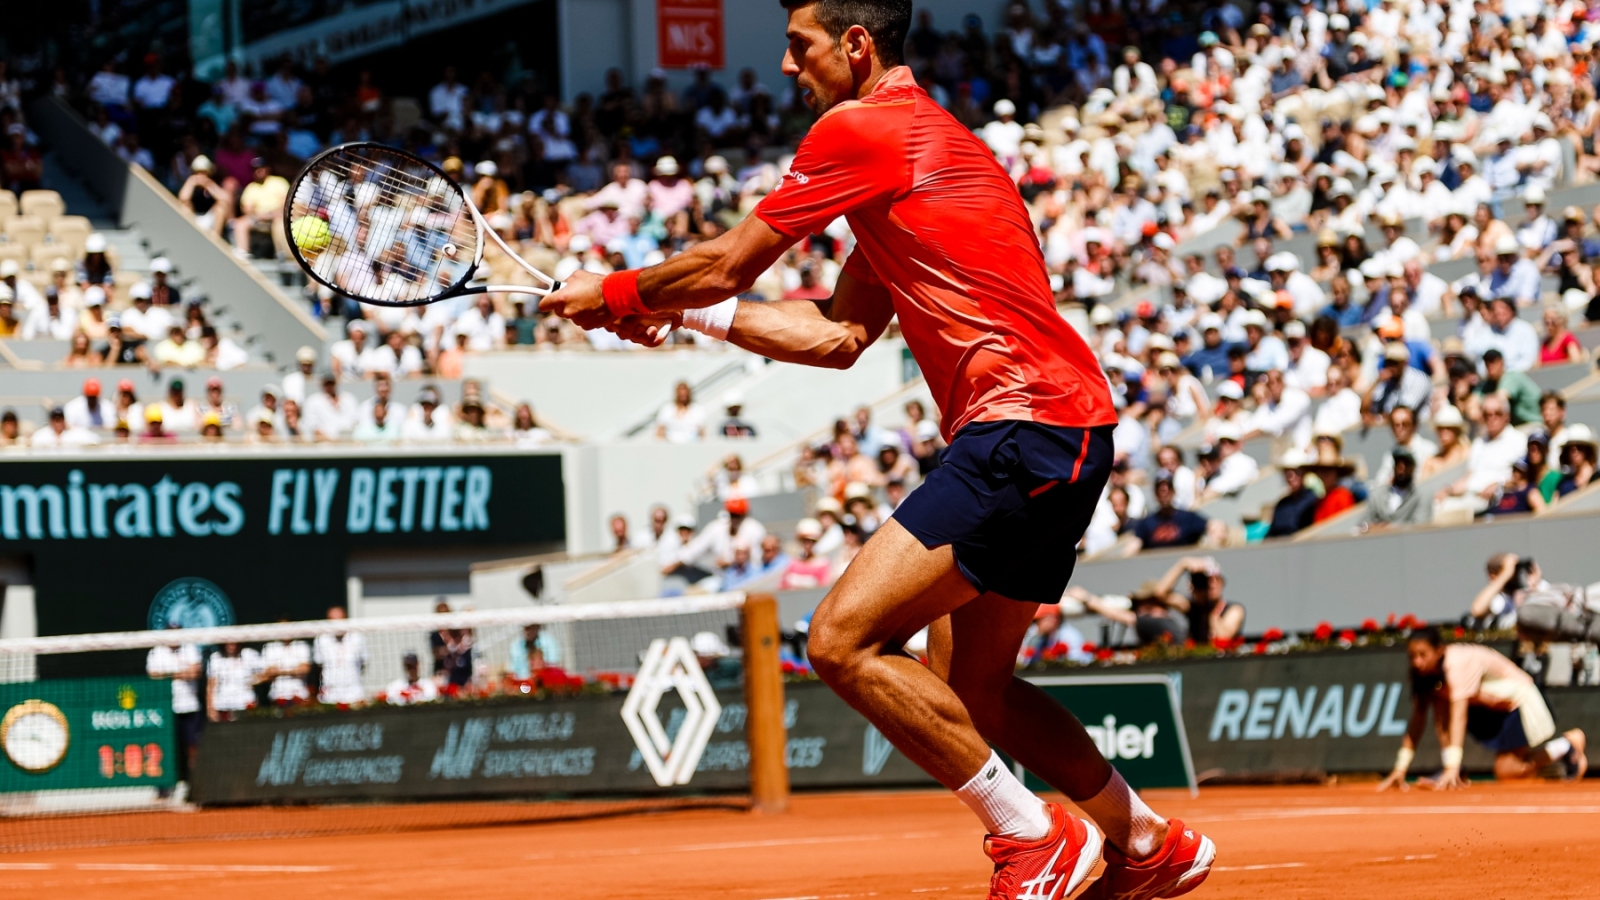 How to Watch French Open Finals Online Free: Tennis Live Stream